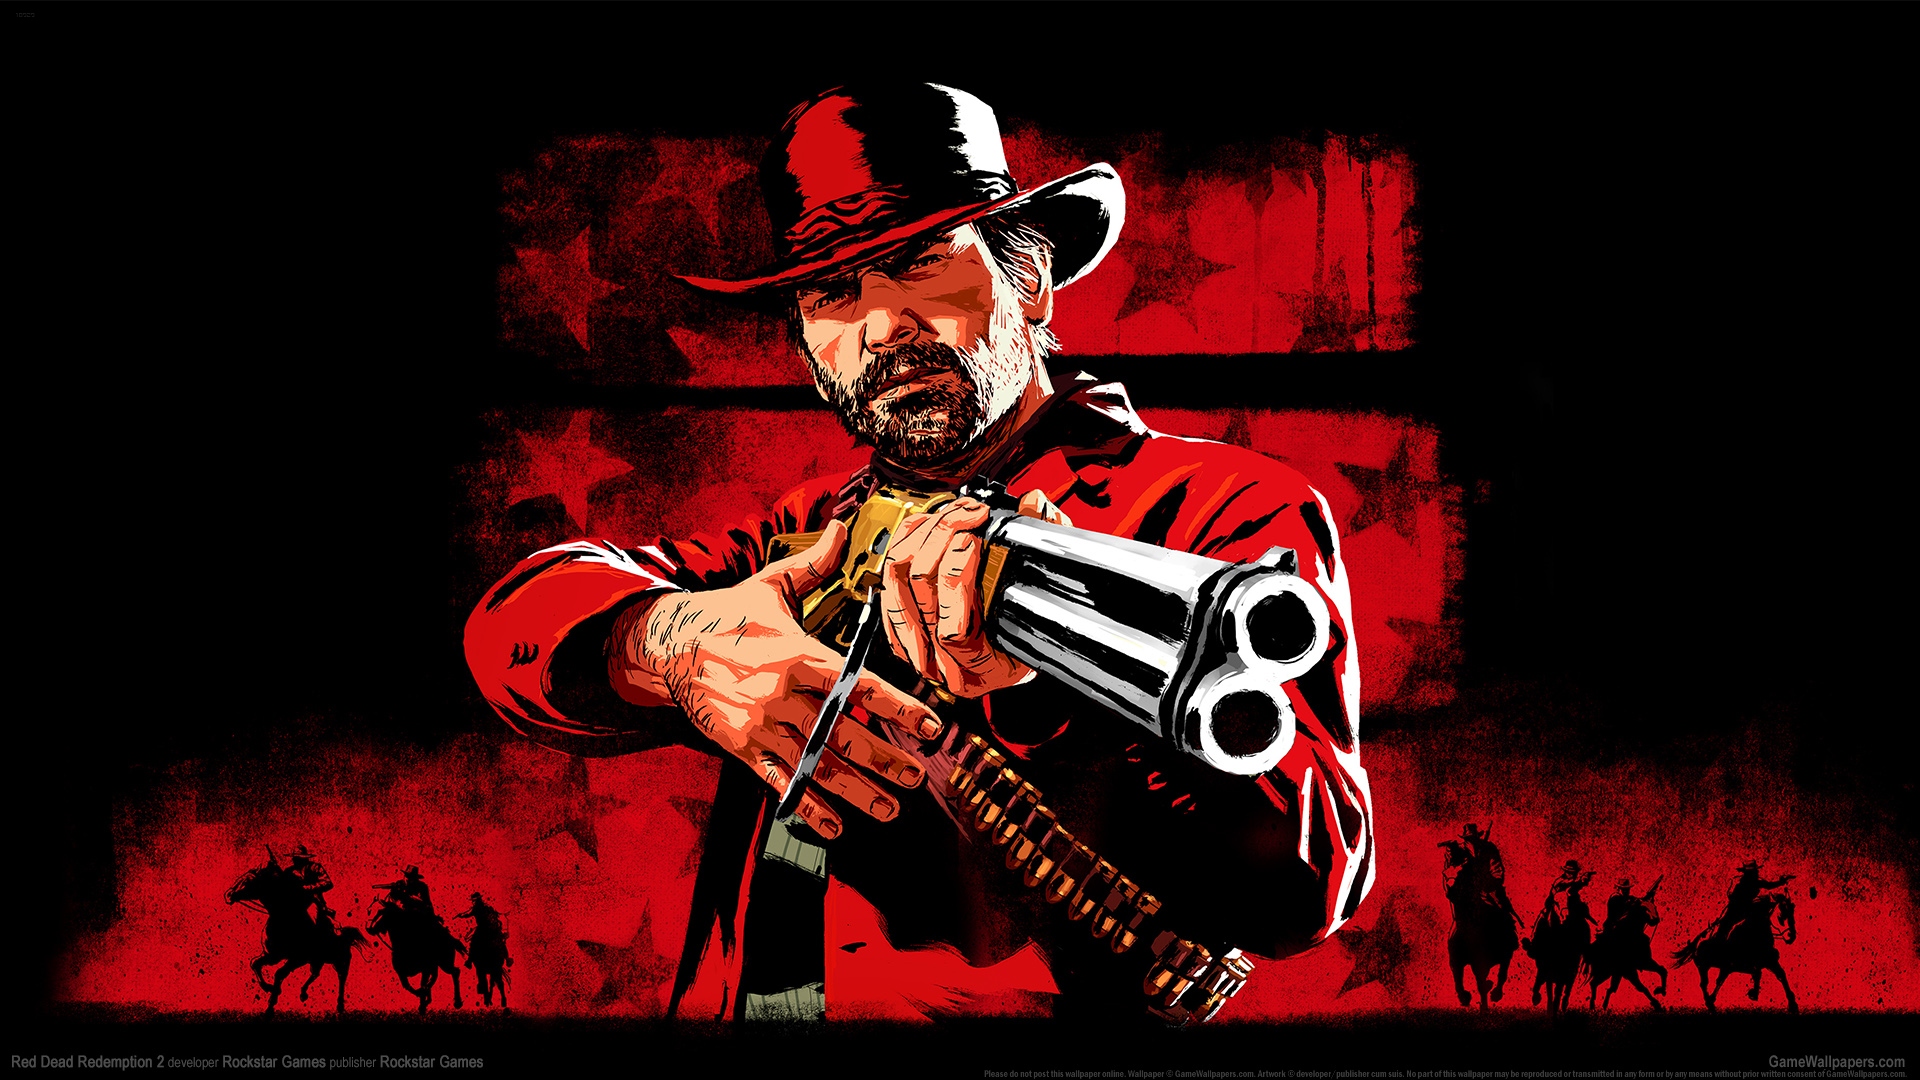 Red Dead Redemption 2 1920x1080 wallpaper or background 04